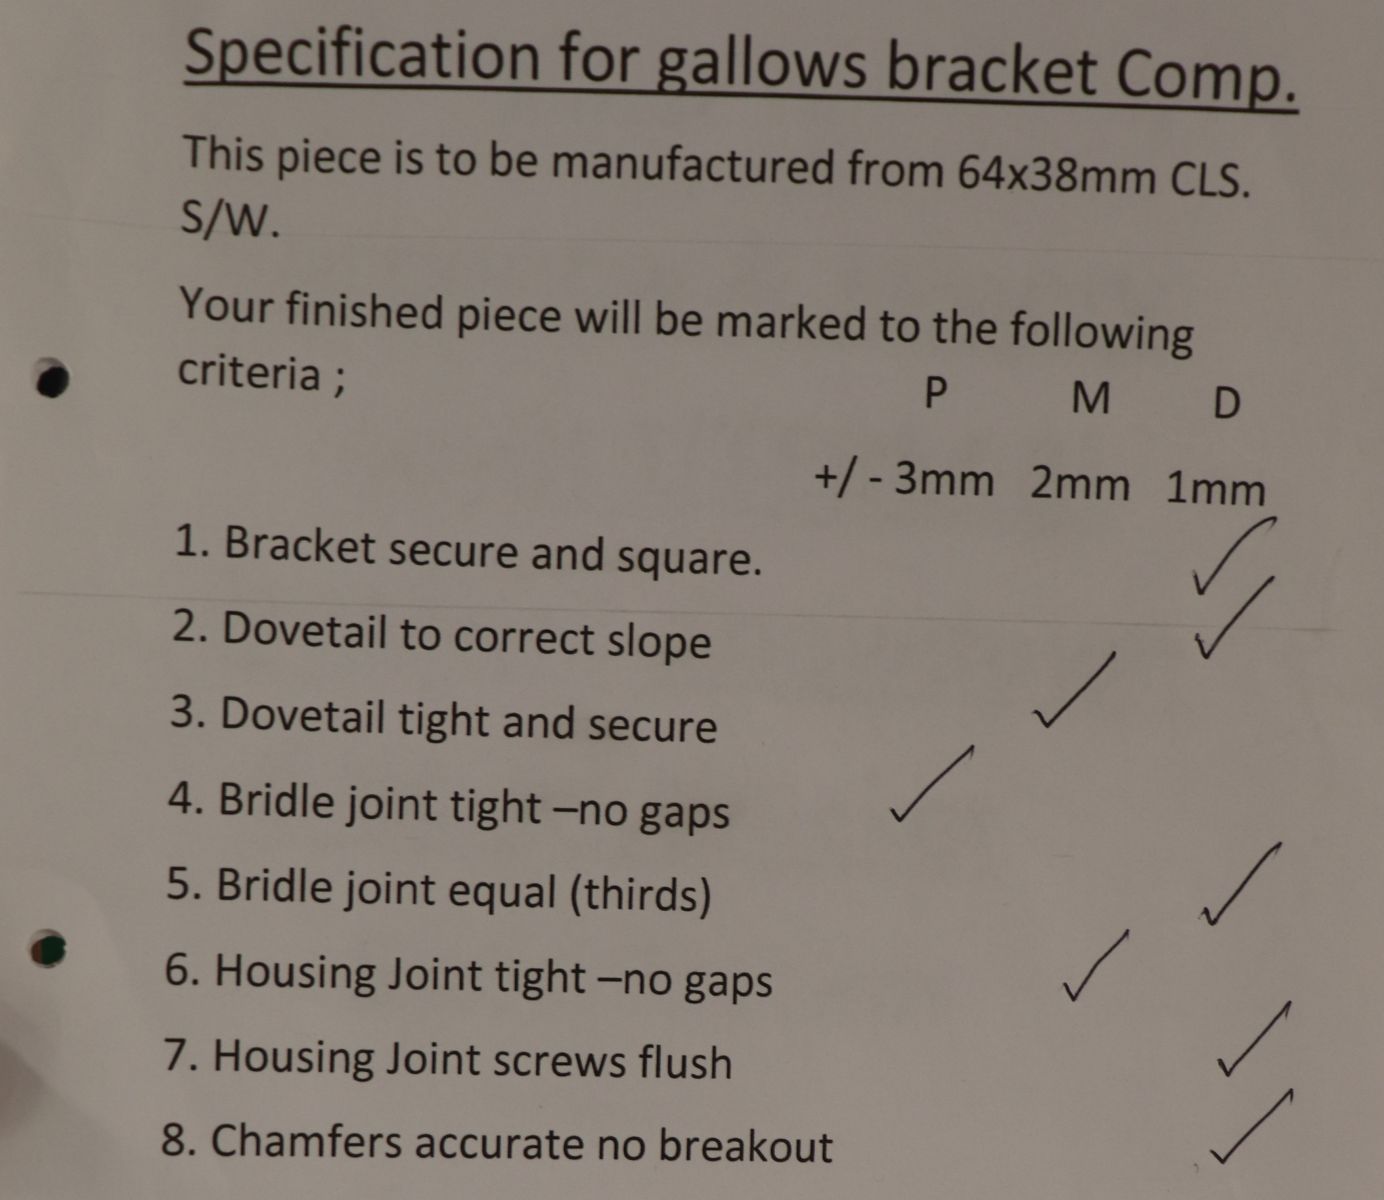 Specification for Gallows Brakcet Competition